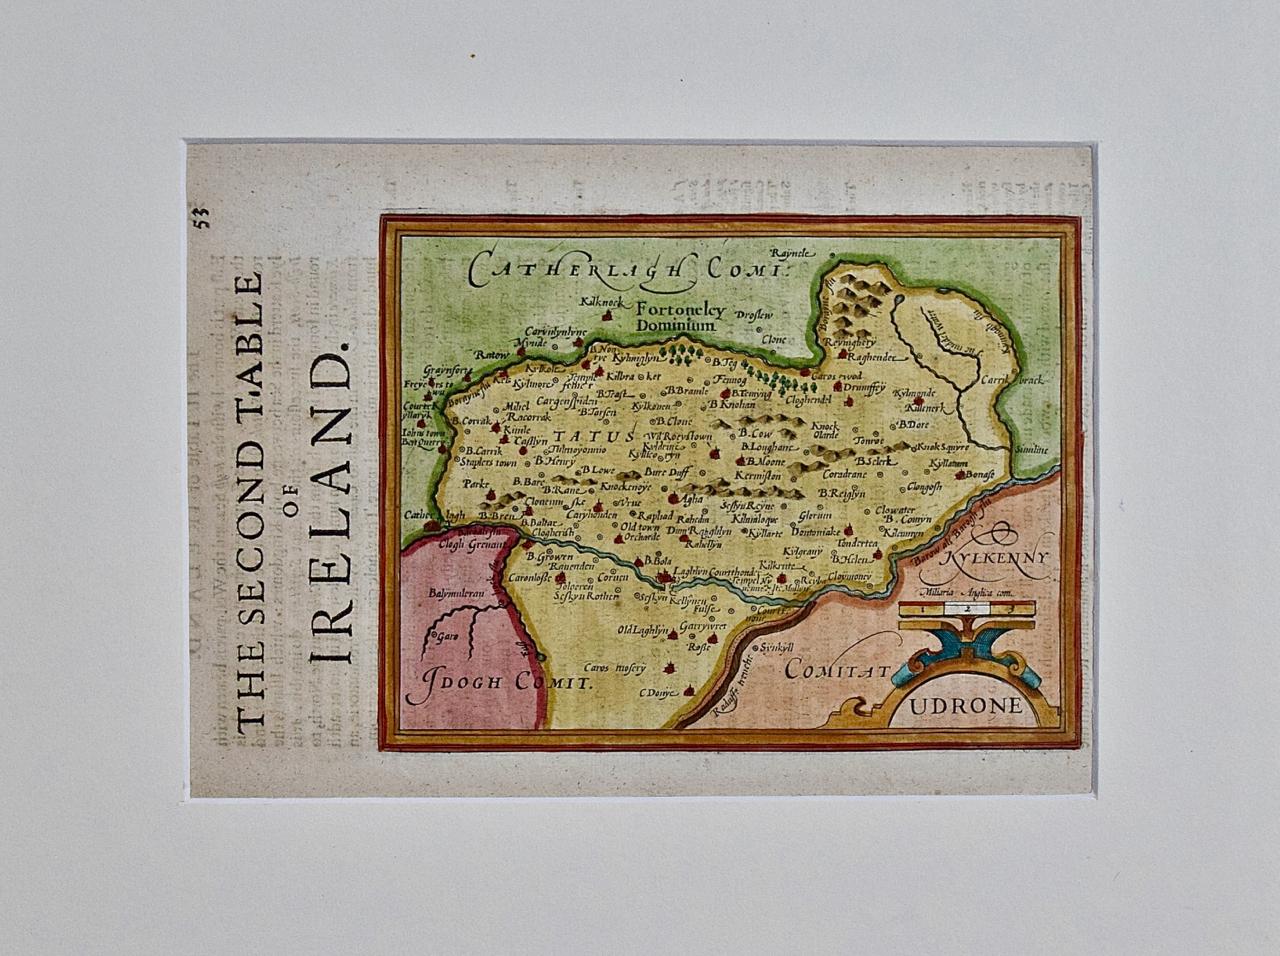 Southeastern Ireland: A 17th Century Hand Colored Map by Mercator and Hondius - Print by Gerard Mercator